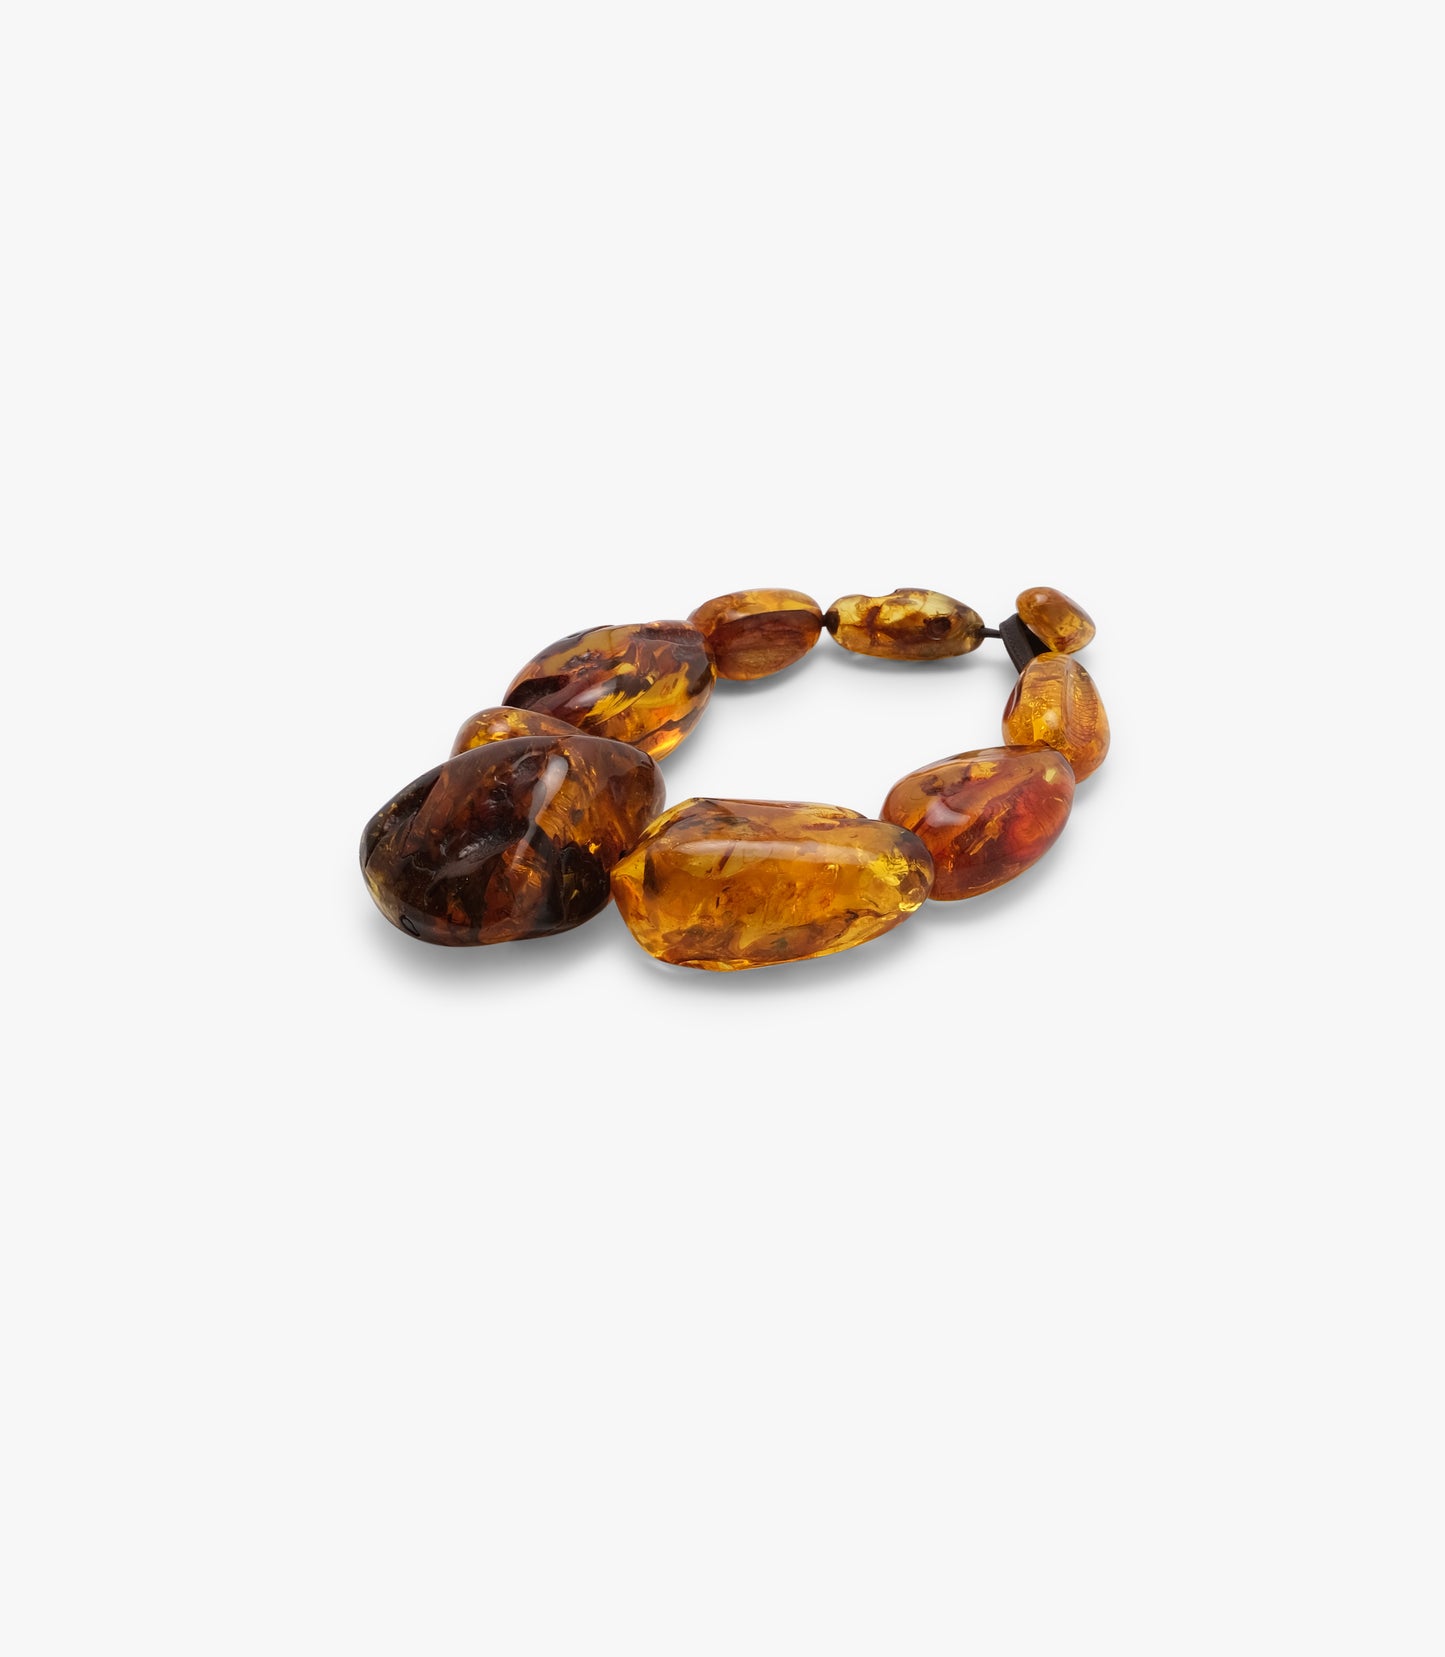 50th anniversary necklace: amber